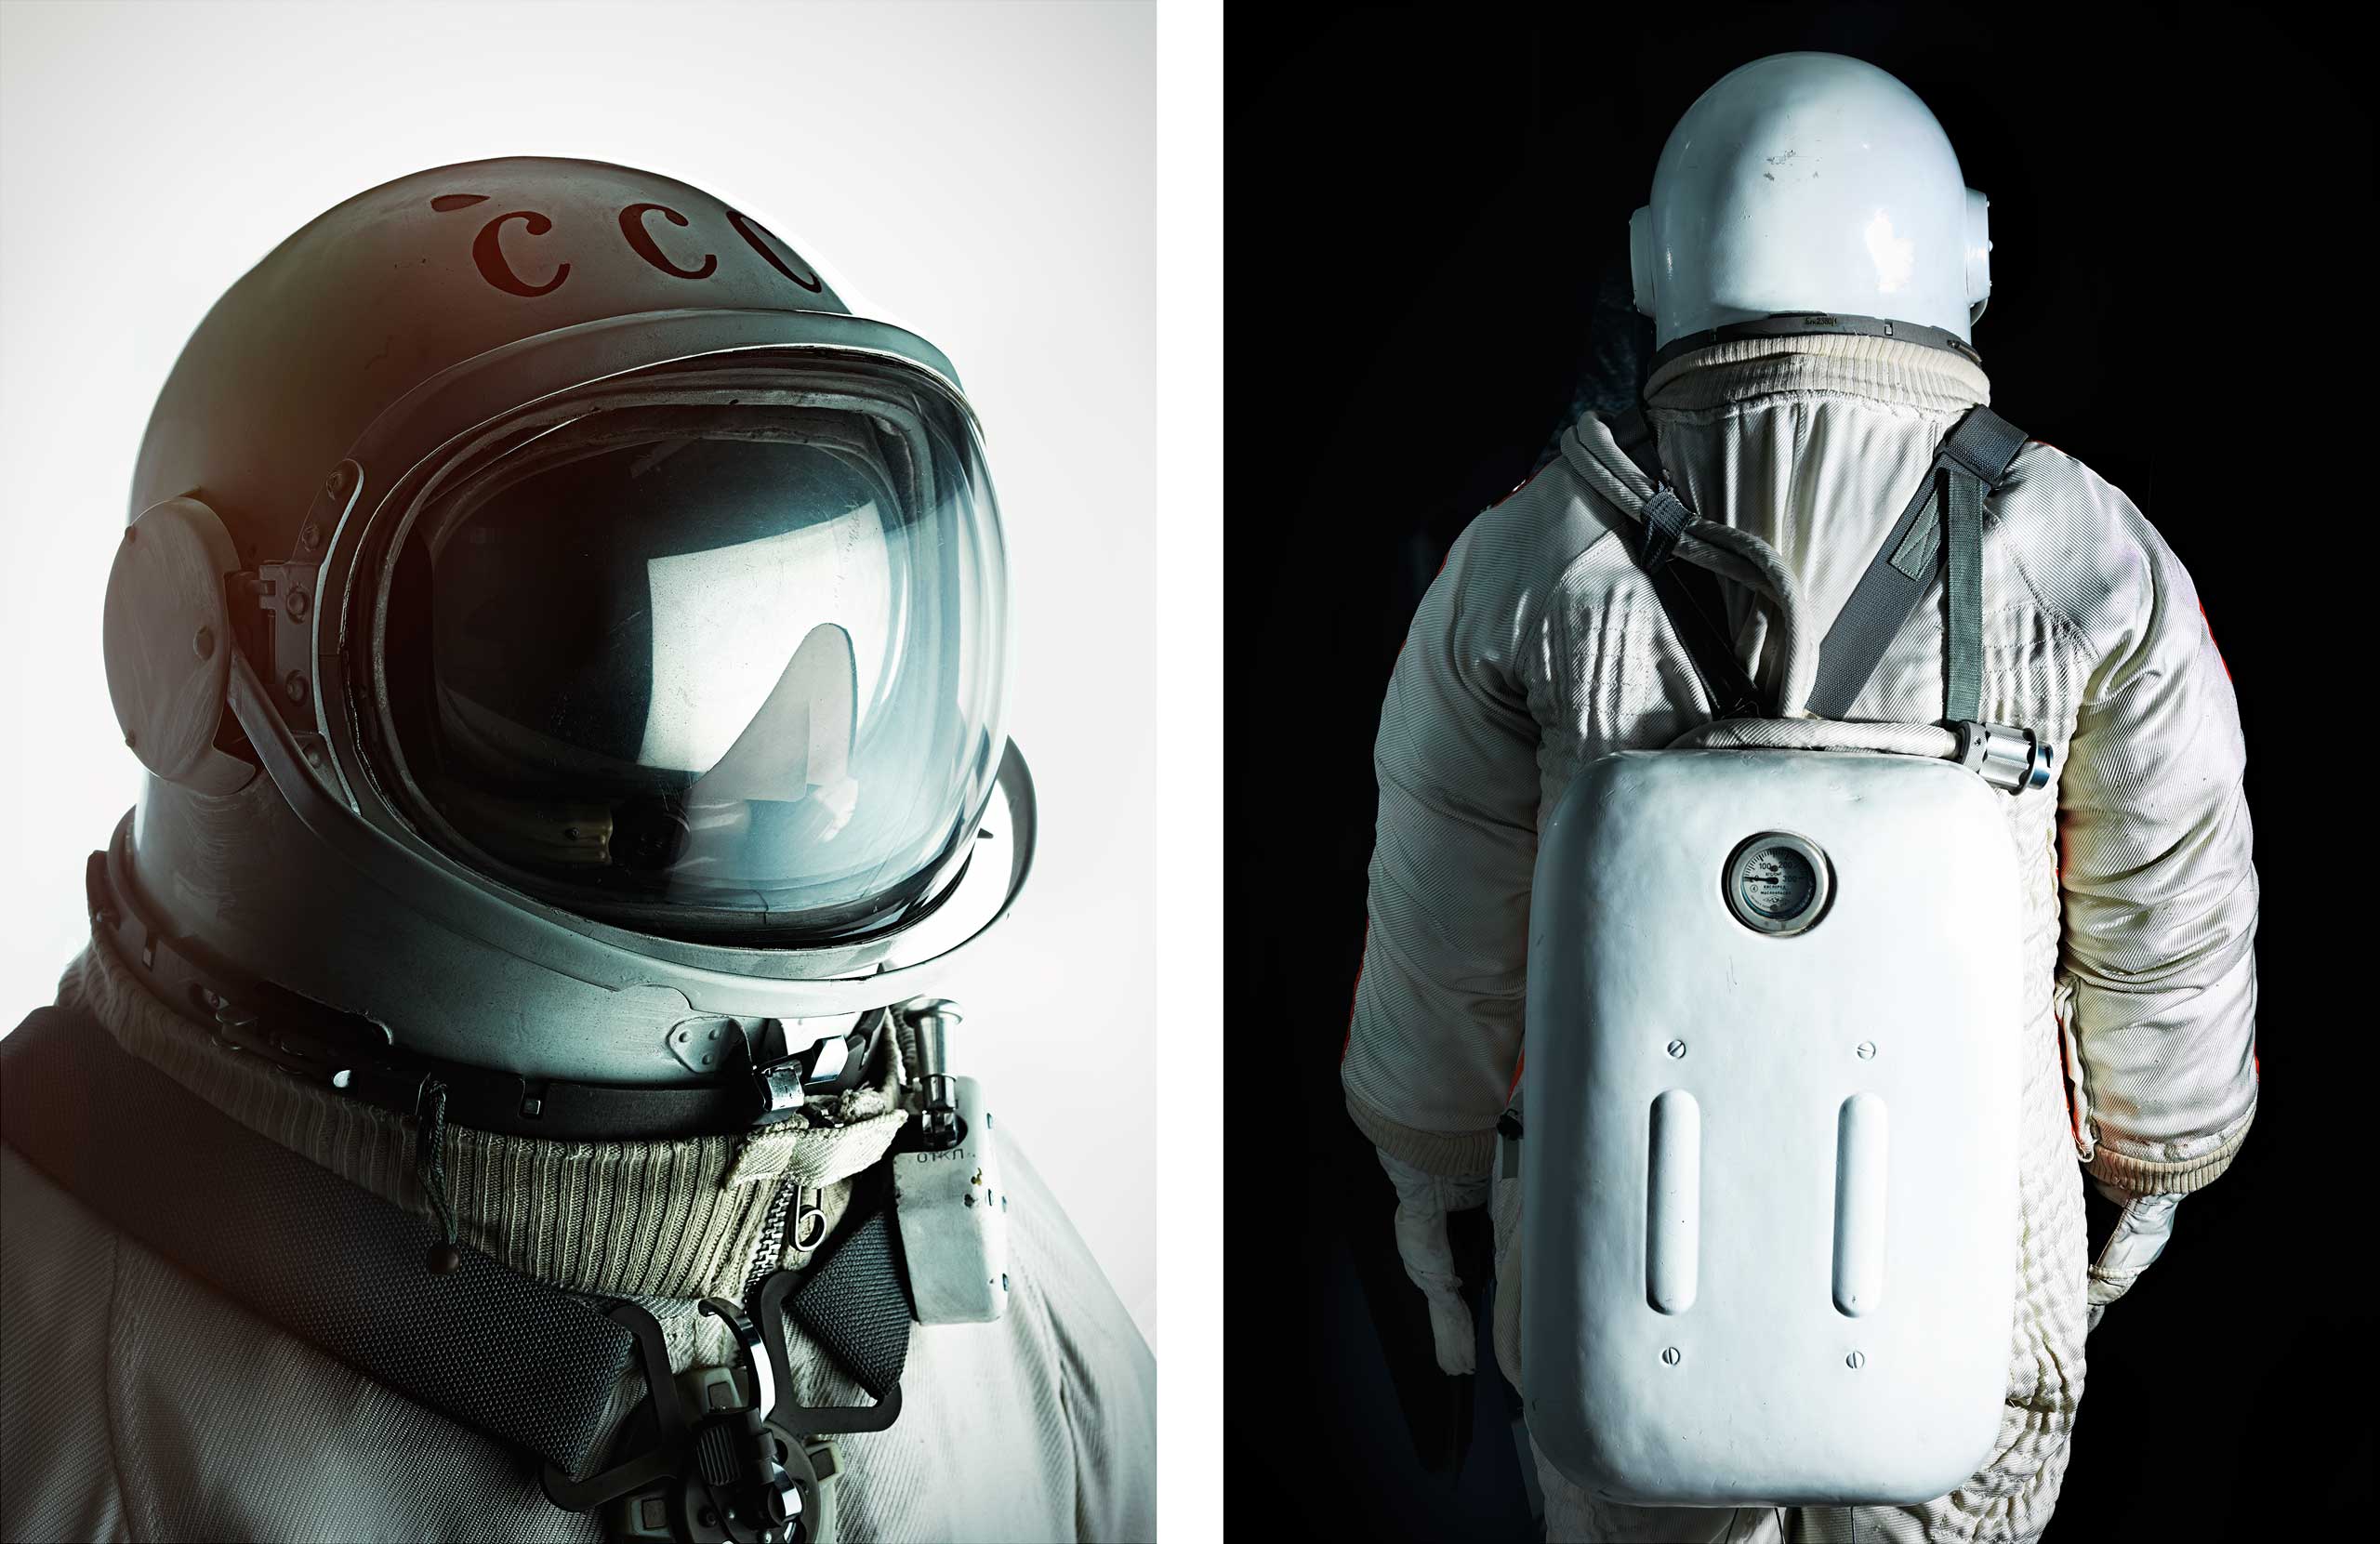 The spacesuit worn by Alexei Leonov on the first-ever spacewalk on March 18, 1965.